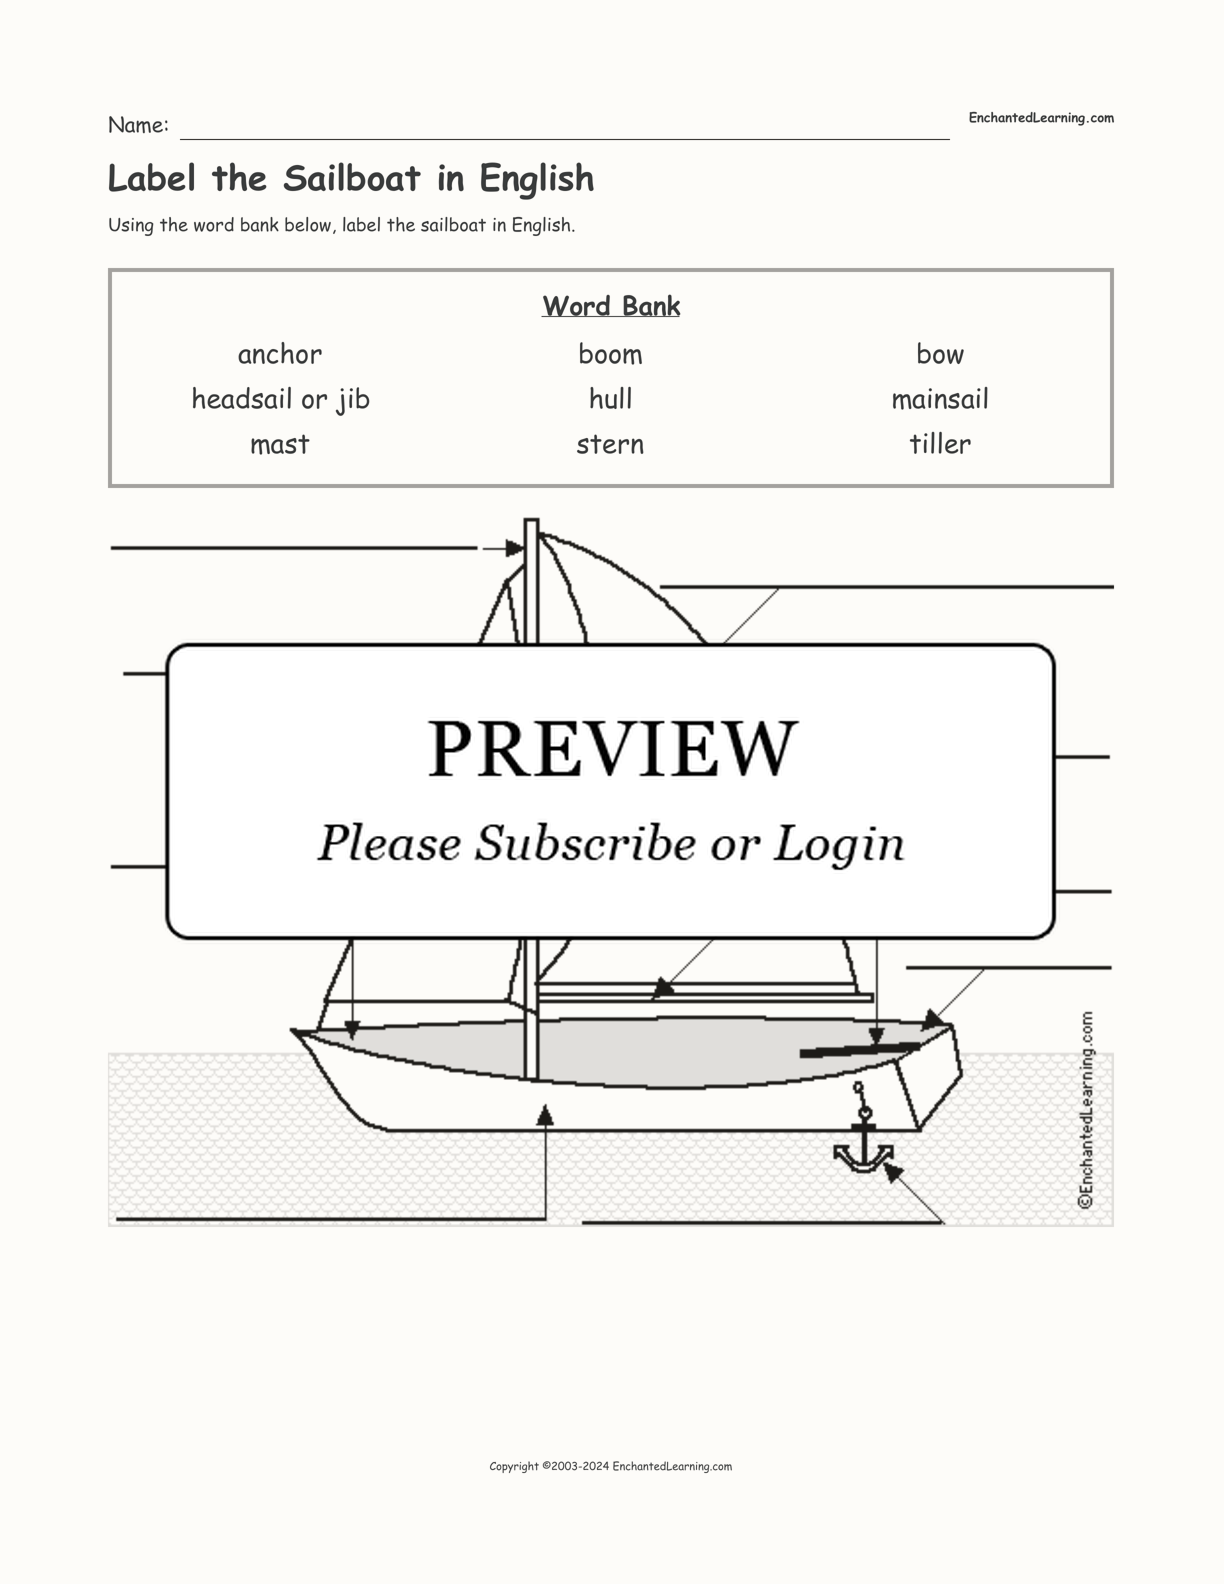 Label the Sailboat in English interactive worksheet page 1